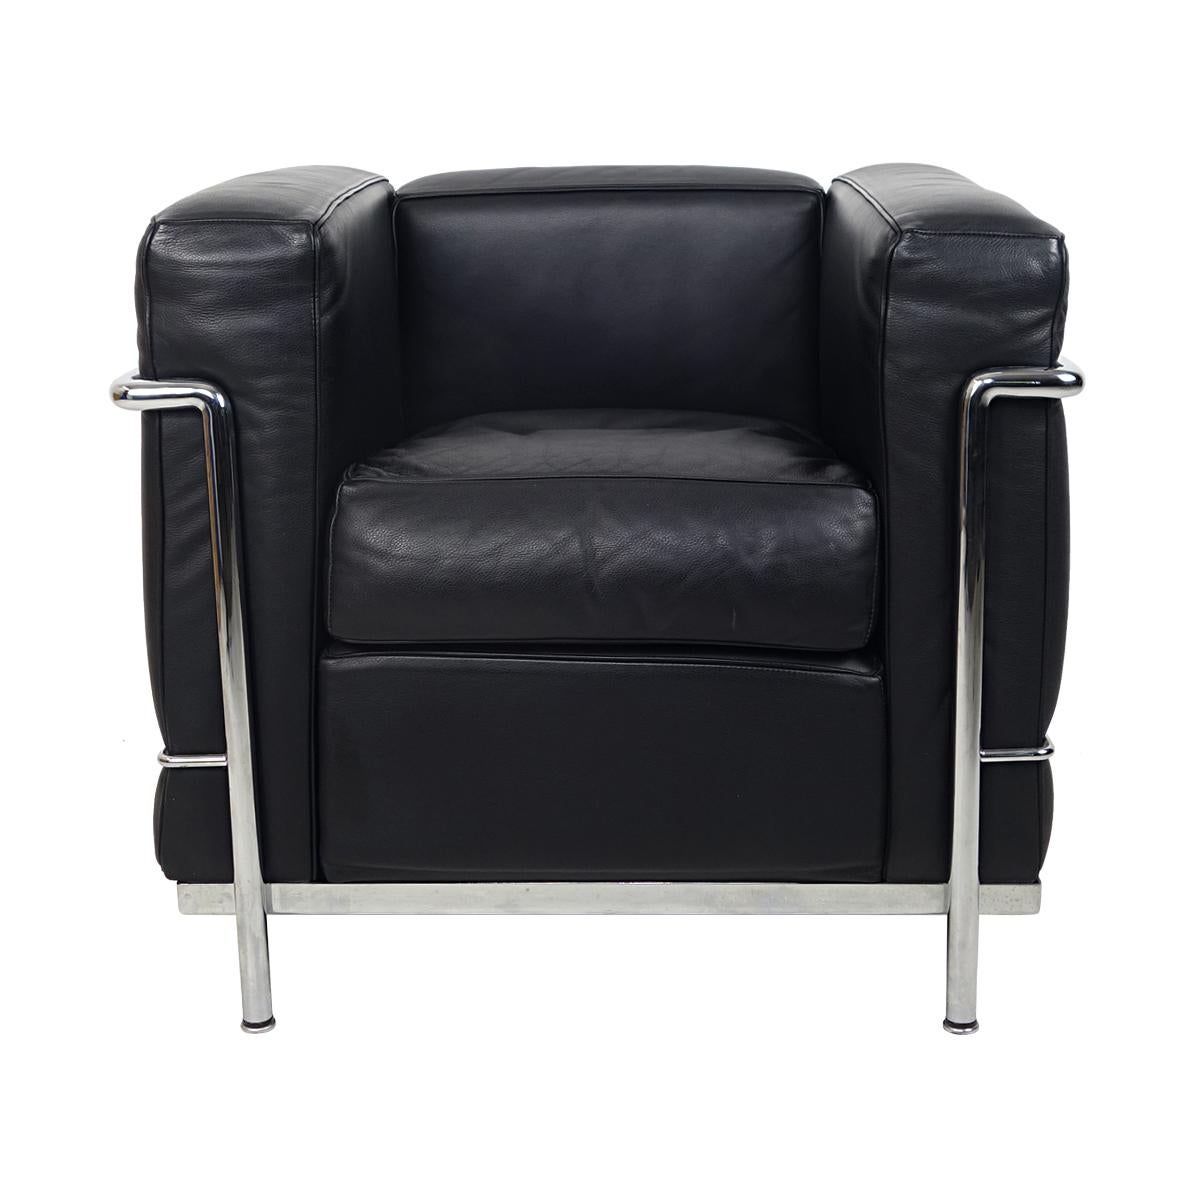 Pair of armchairs LC2 Petit Modèle with polished chrome frame and separate black leather cushions. 
The LC2 was designed in 1928 by Le Corbusier and Charlotte Perriand and ever since it has been the archetypal Modernist armchair that never seems to